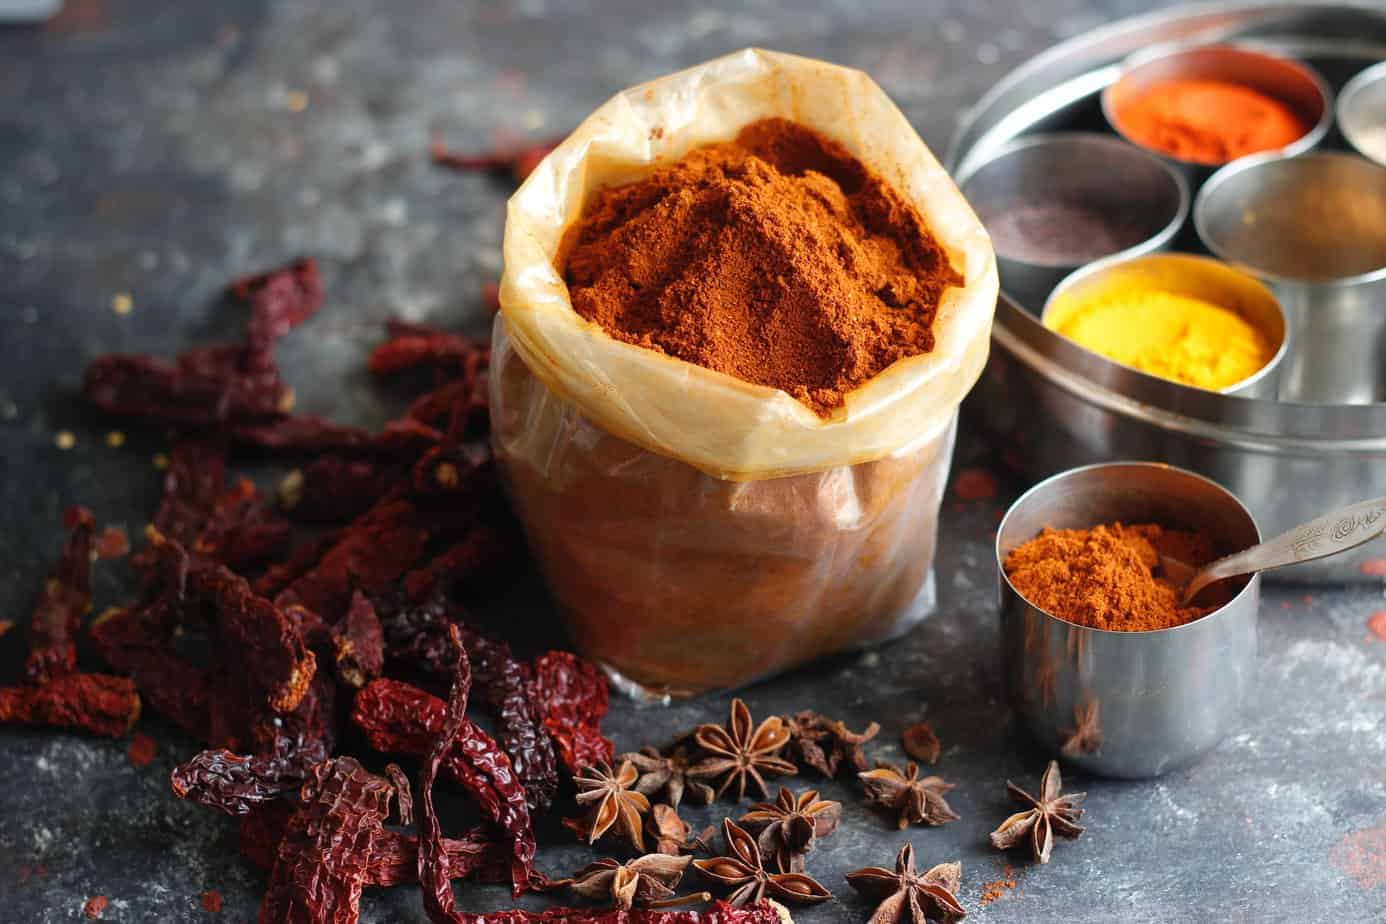 Turmeric’s Anti-Inflammatory Powers That Could Help